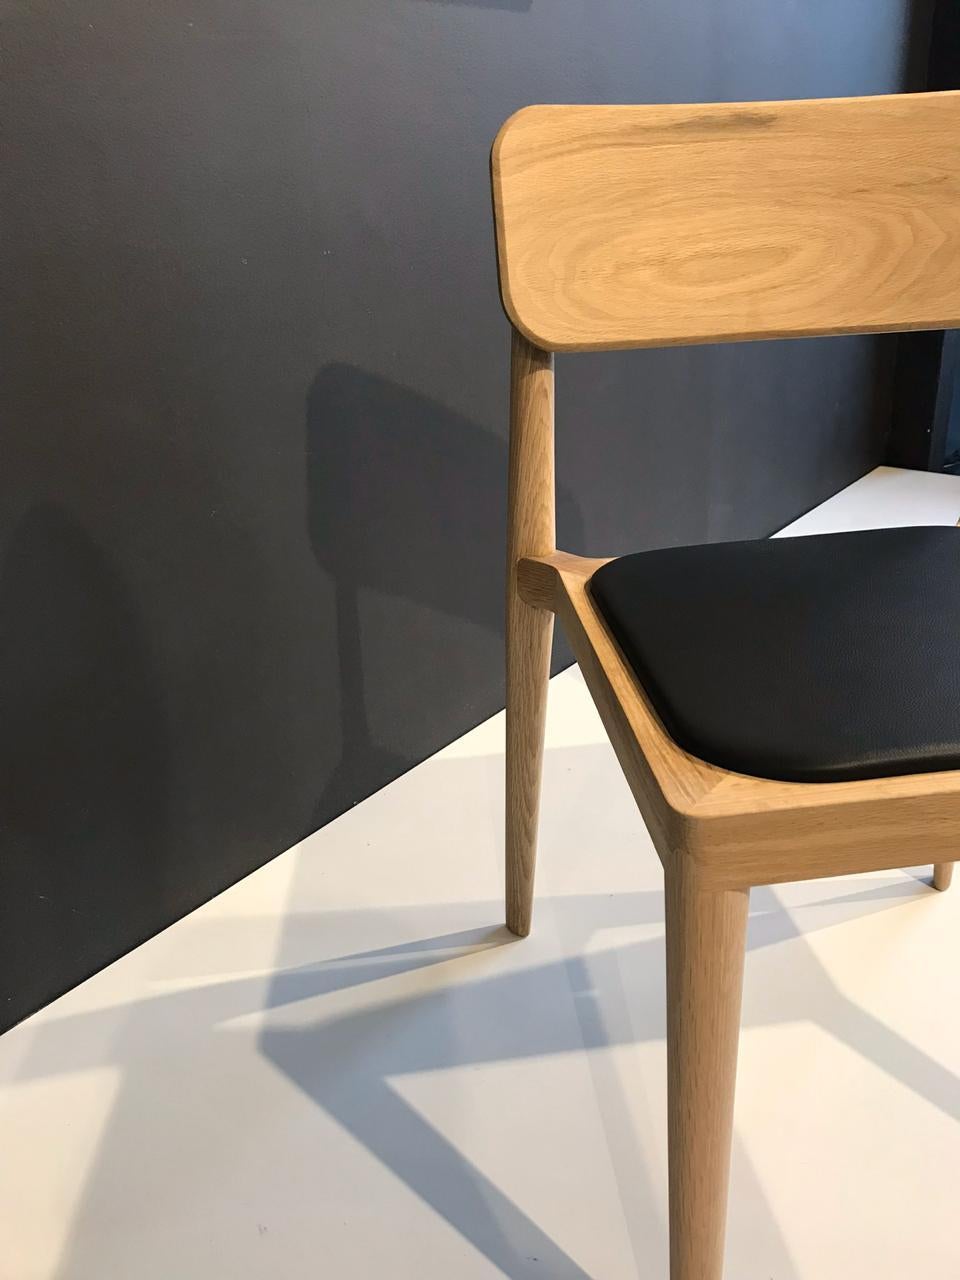 Linard and Gerard is a furniture collection designed by Thai Hua, a designer of Vietnamese origin who was trained in Switzerland. This collection, comprised of chairs, benches, and tables, explores new possibilities of construction through the